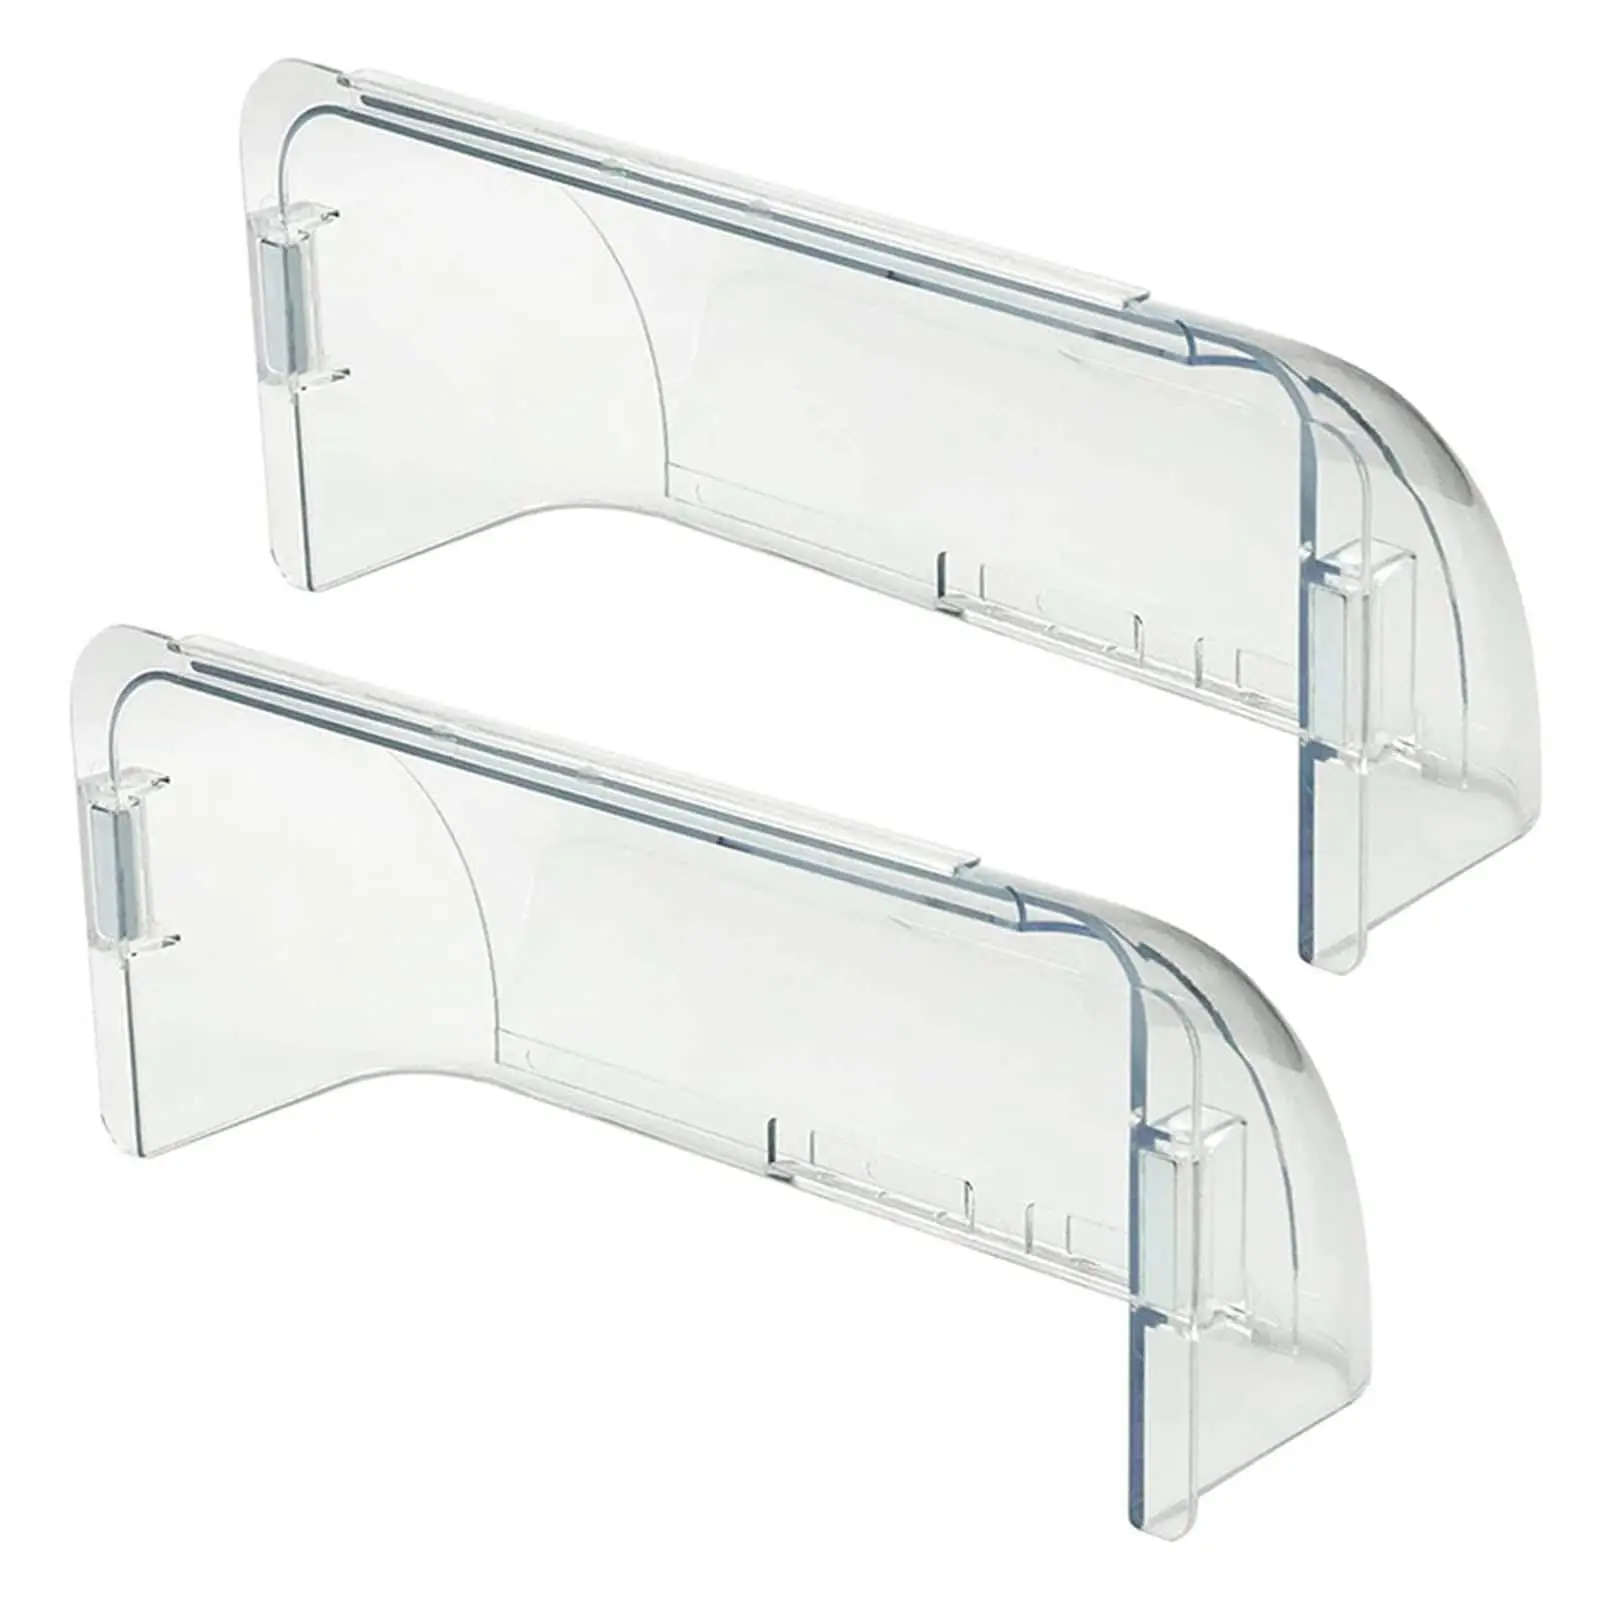 2x Transparent Deflector Adjustable Air Vent Deflector Between 9-14 Vent Covers for Air Conditioning Sidewall